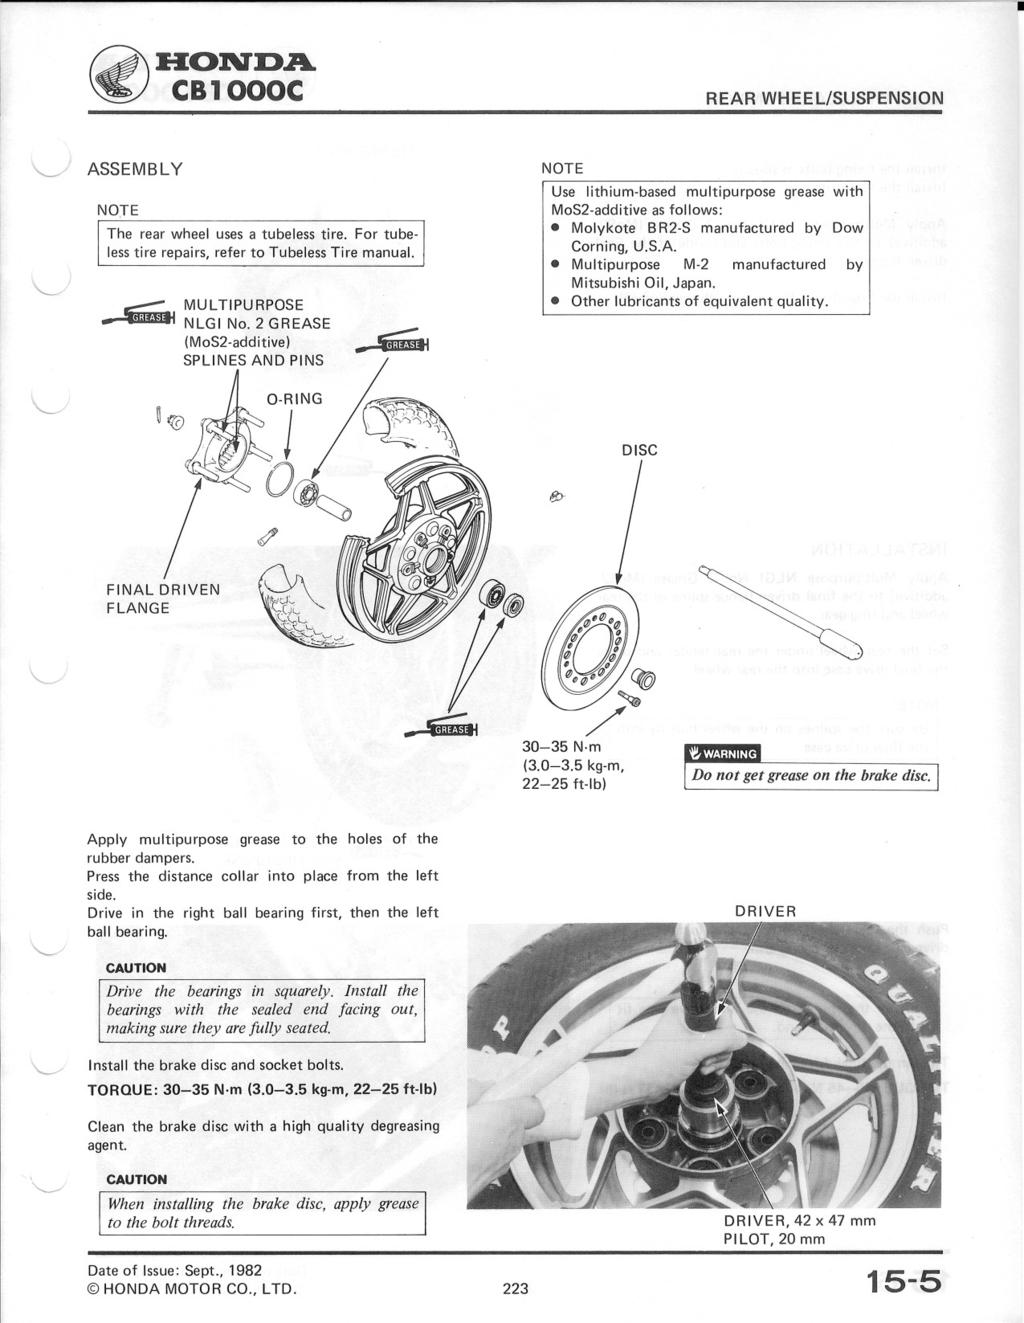 ~:H:OlV:D.A. ~ CB1000C \...-.-/ ASSEMBLY ~J NOJE The rear wheel uses a tubeless tire. For tubeless tire repairs, refer to Tubeless Tire manual. MUl TIPURPOSE NlGI No.